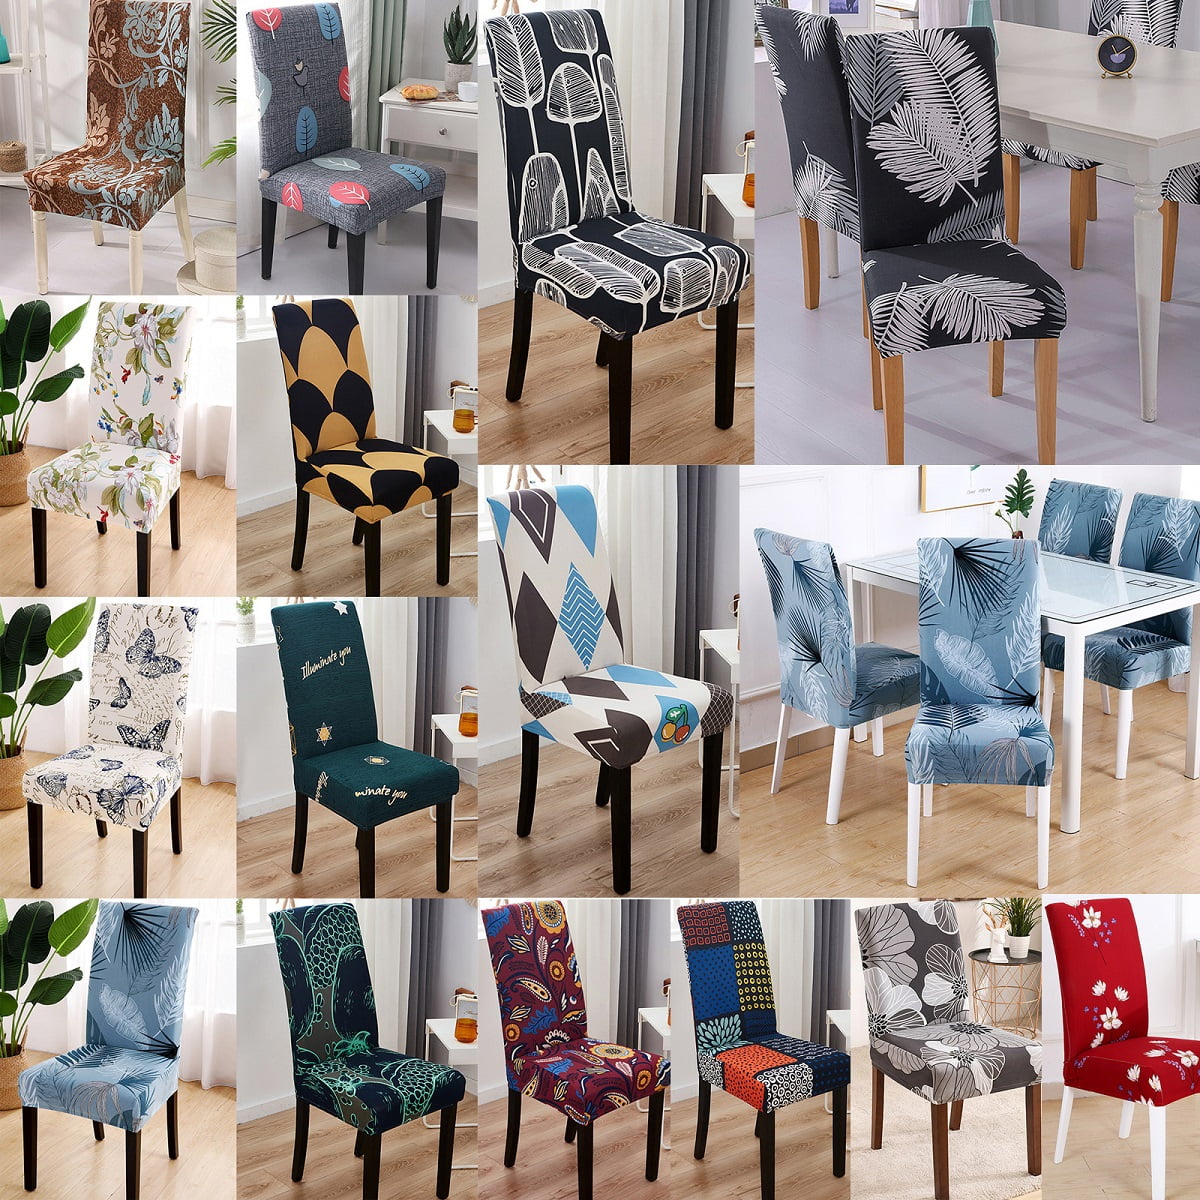 US 1-8Pcs Dining Chair Cover Banquet Seat Stretch Slipcovers Party Home Decor 